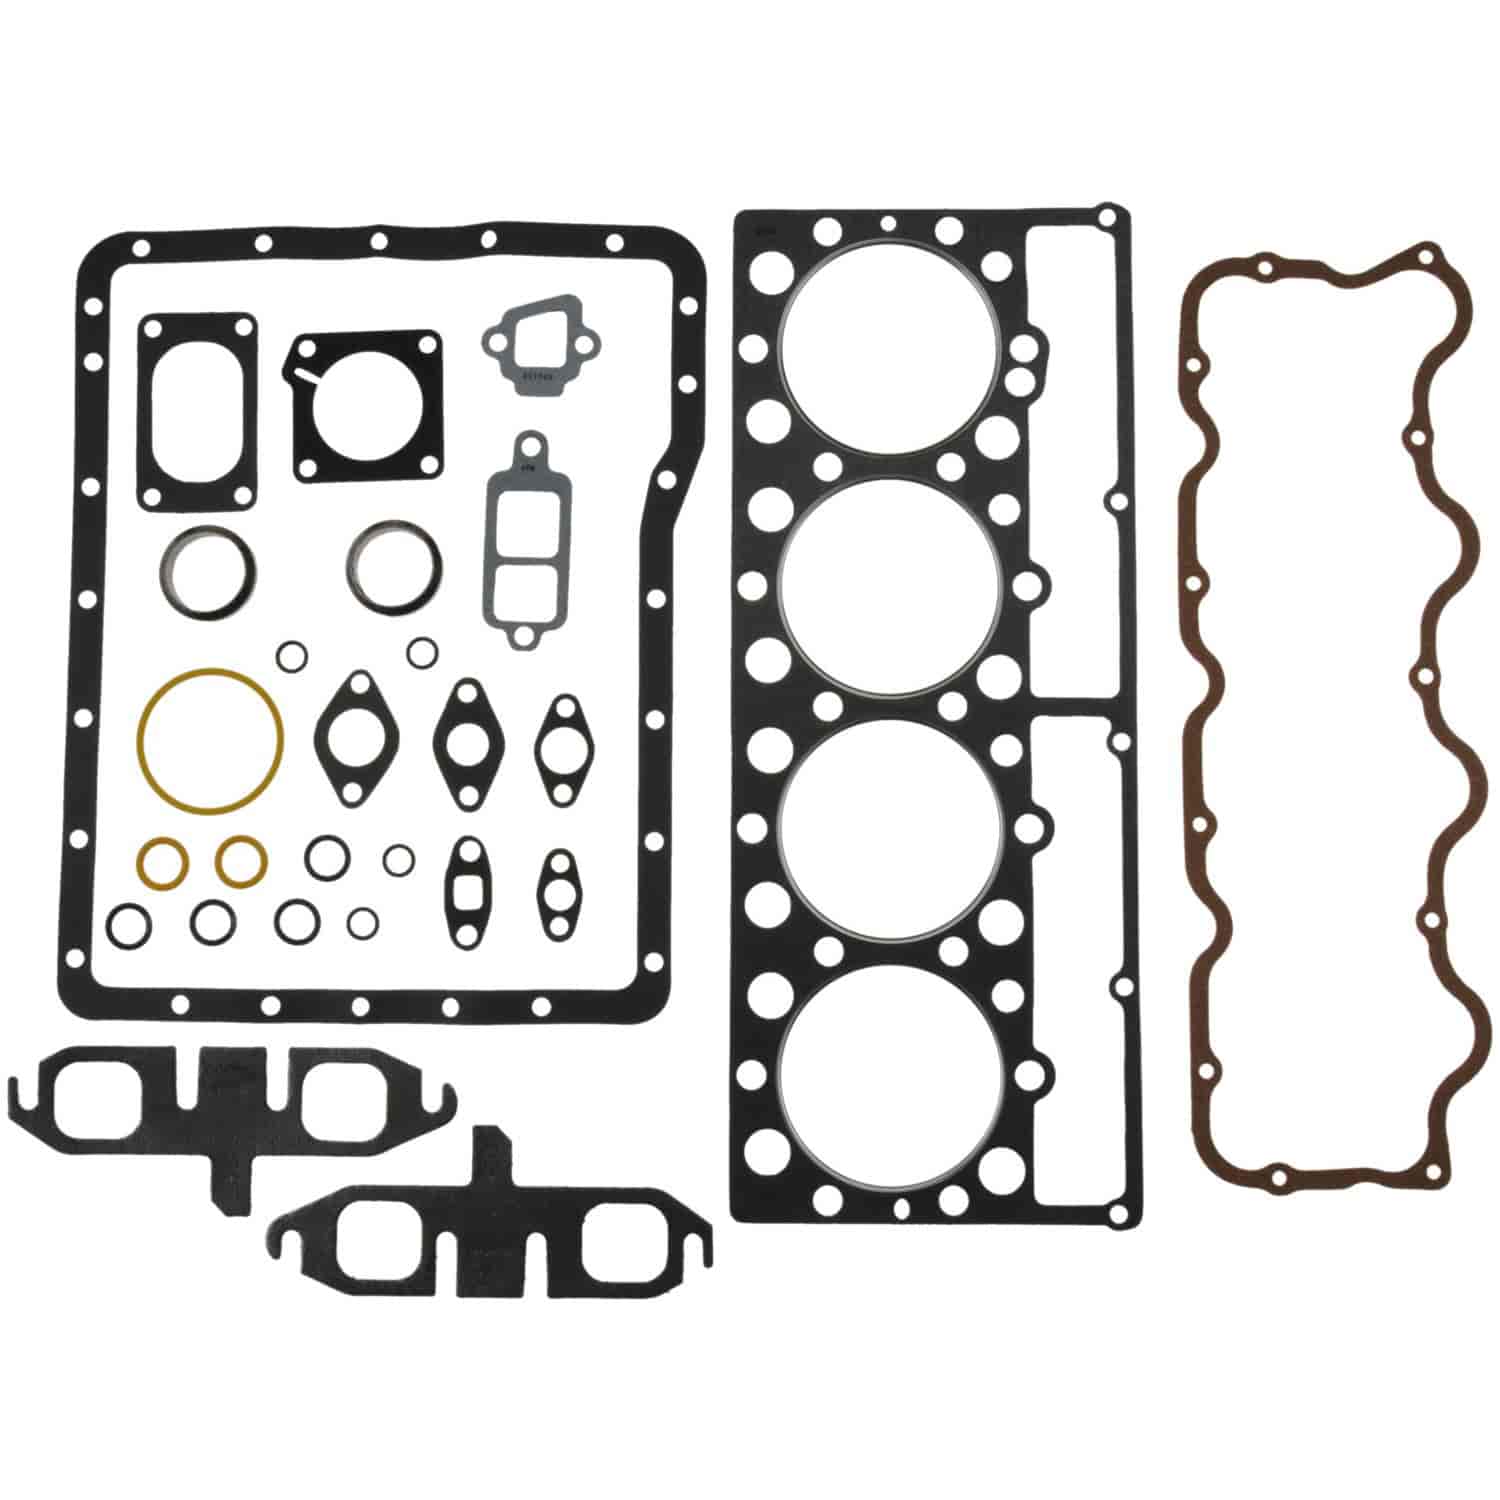 In-Frame Overhaul Set 3304 Caterpillar in-frame gasket set for engines without cylinder head